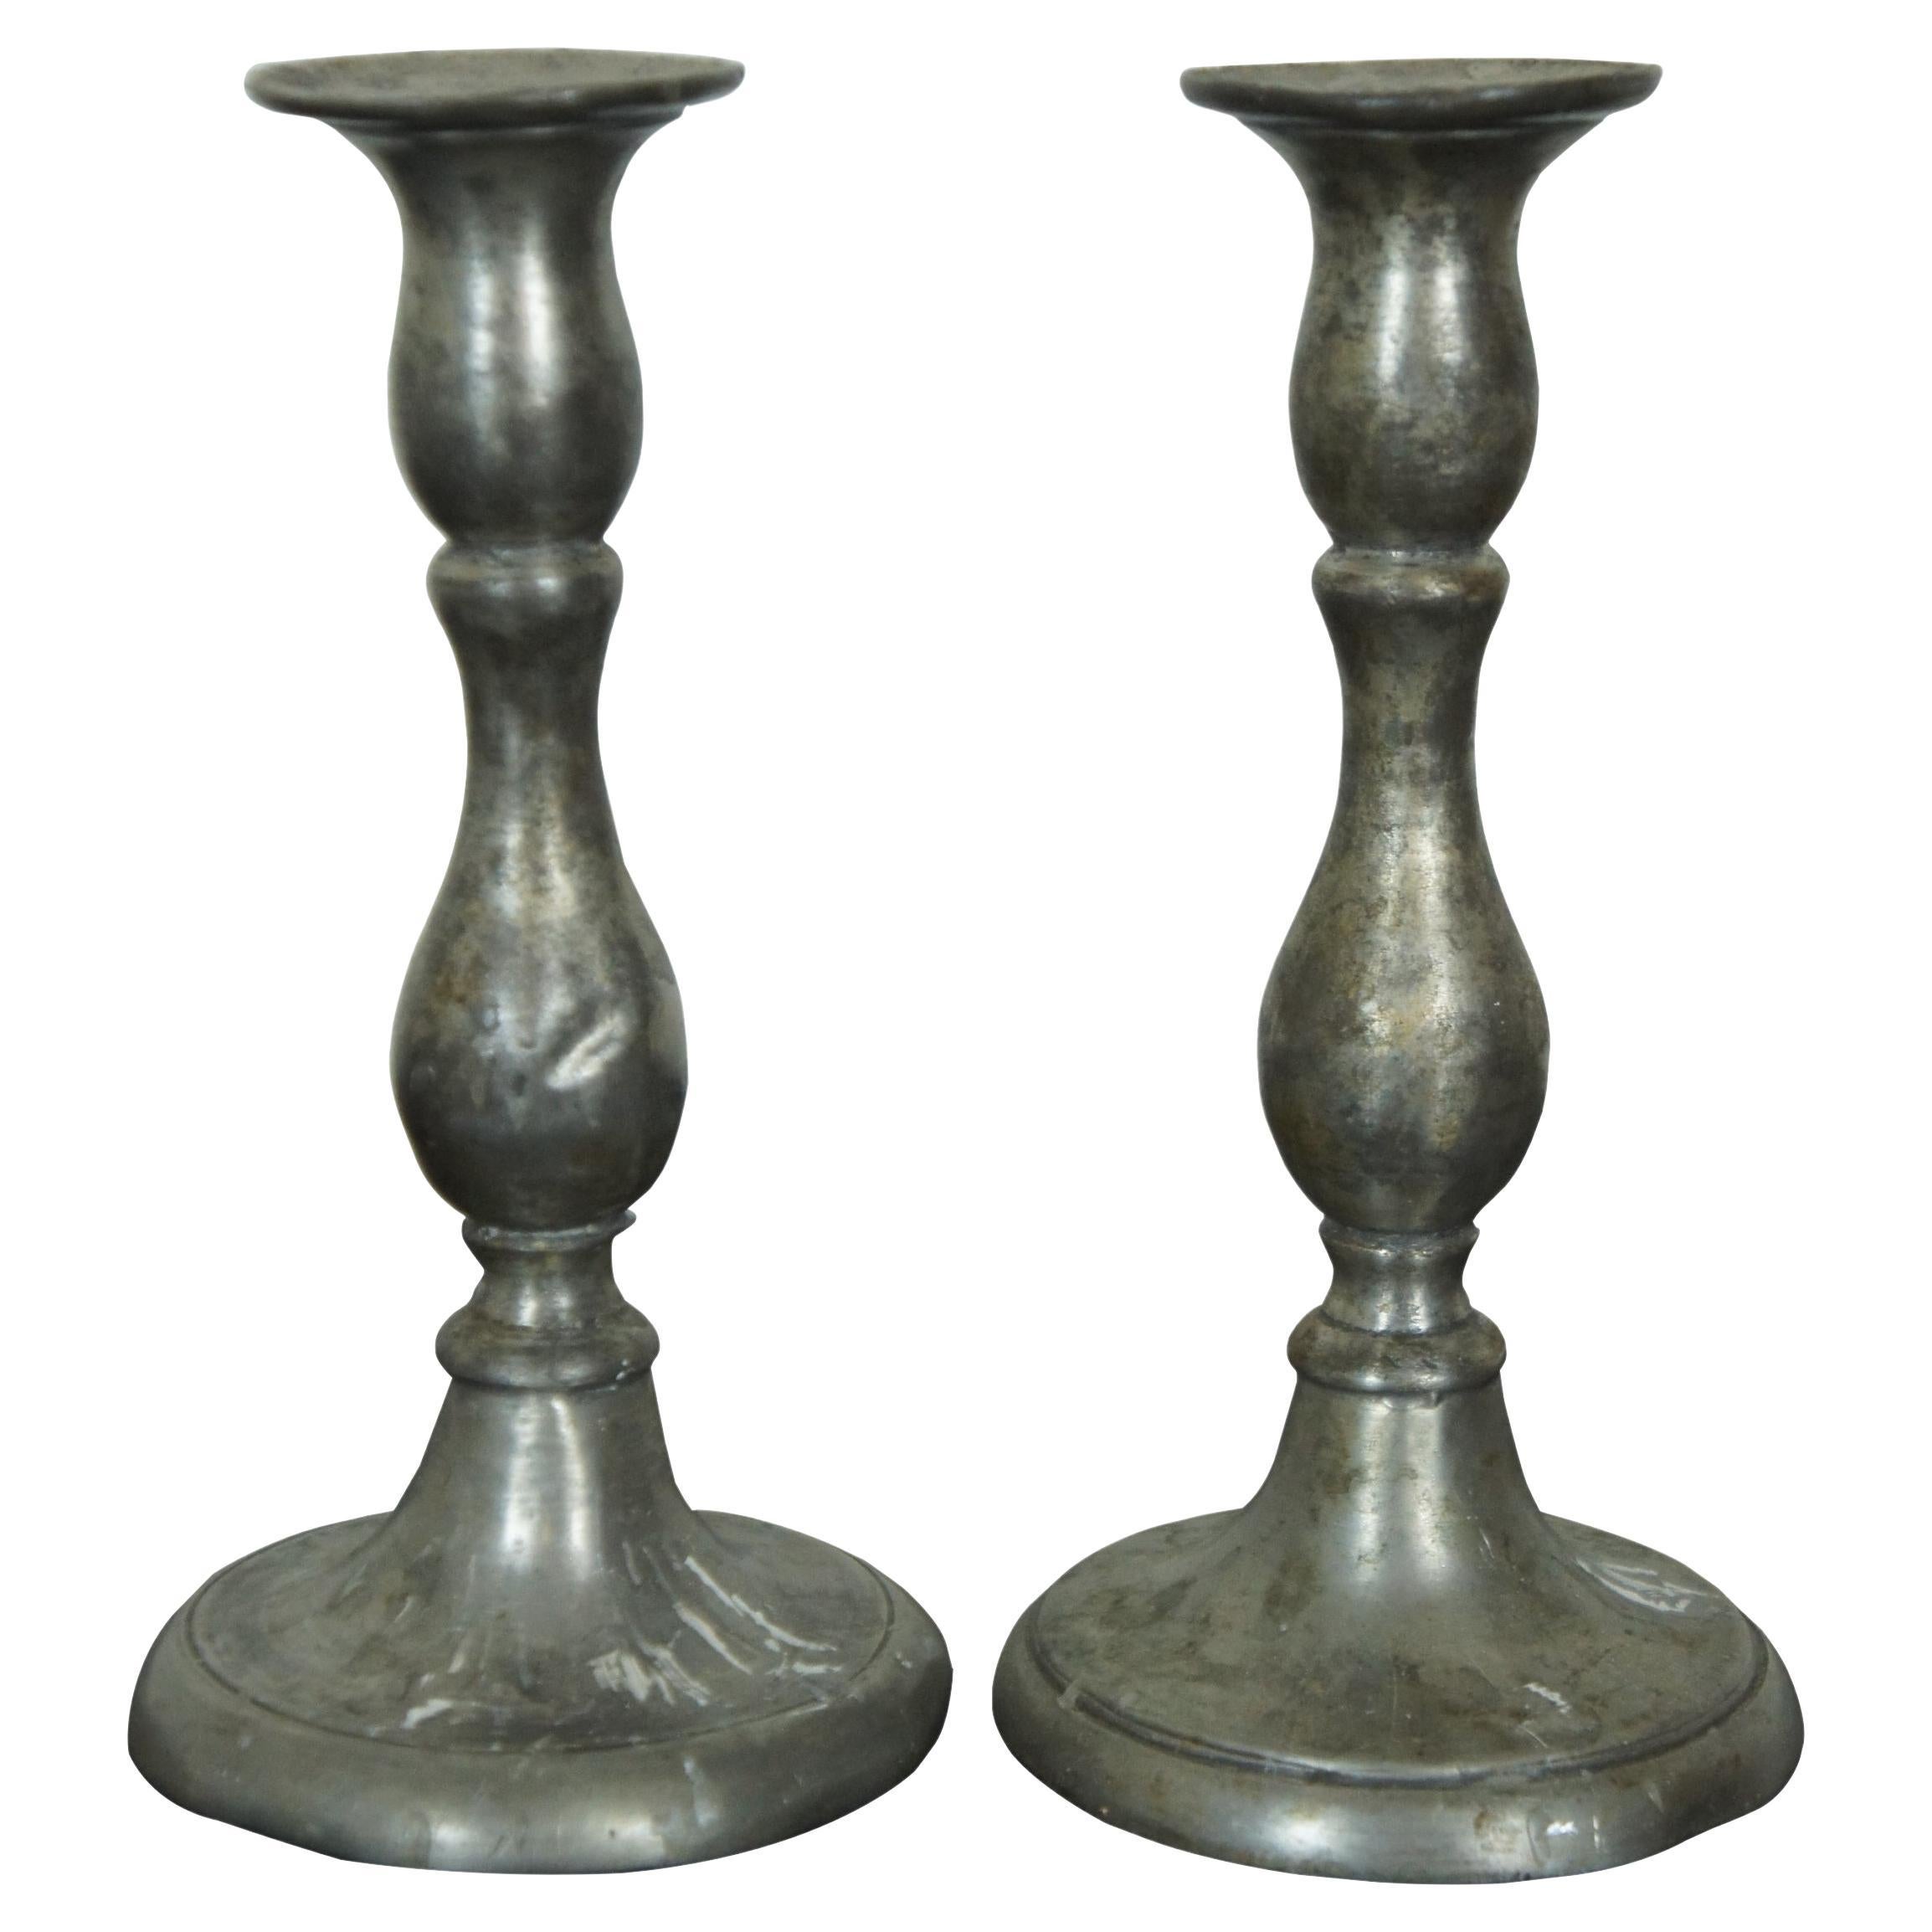 2 Antique Early American Pewter Baluster Taper Candlesticks Candle Holders 7"